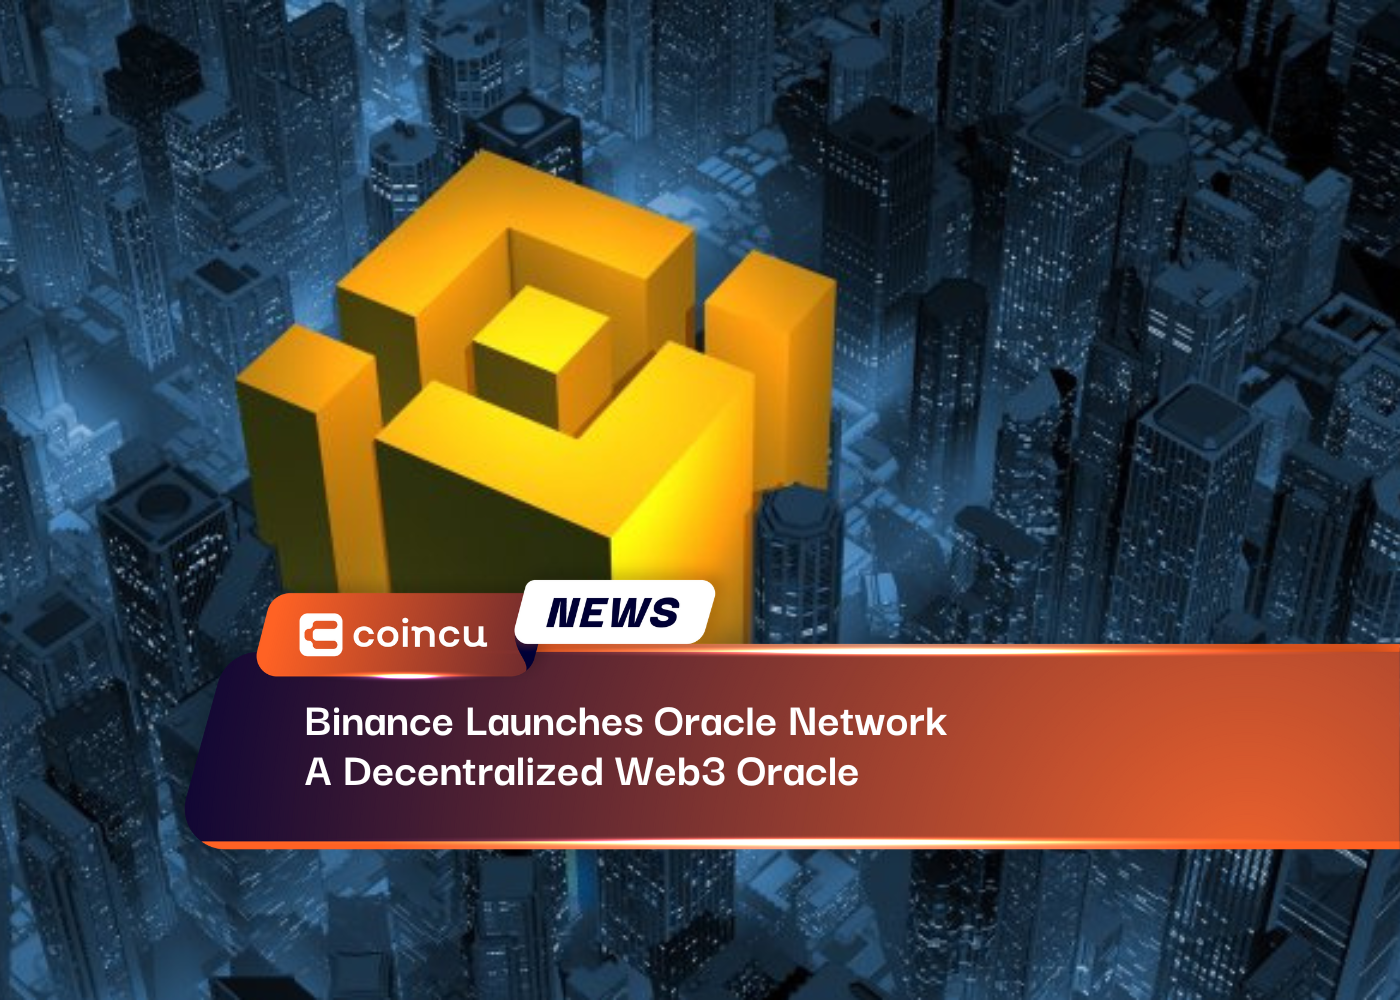 Binance Launches Oracle Network A Decentralized Web3 Oracle